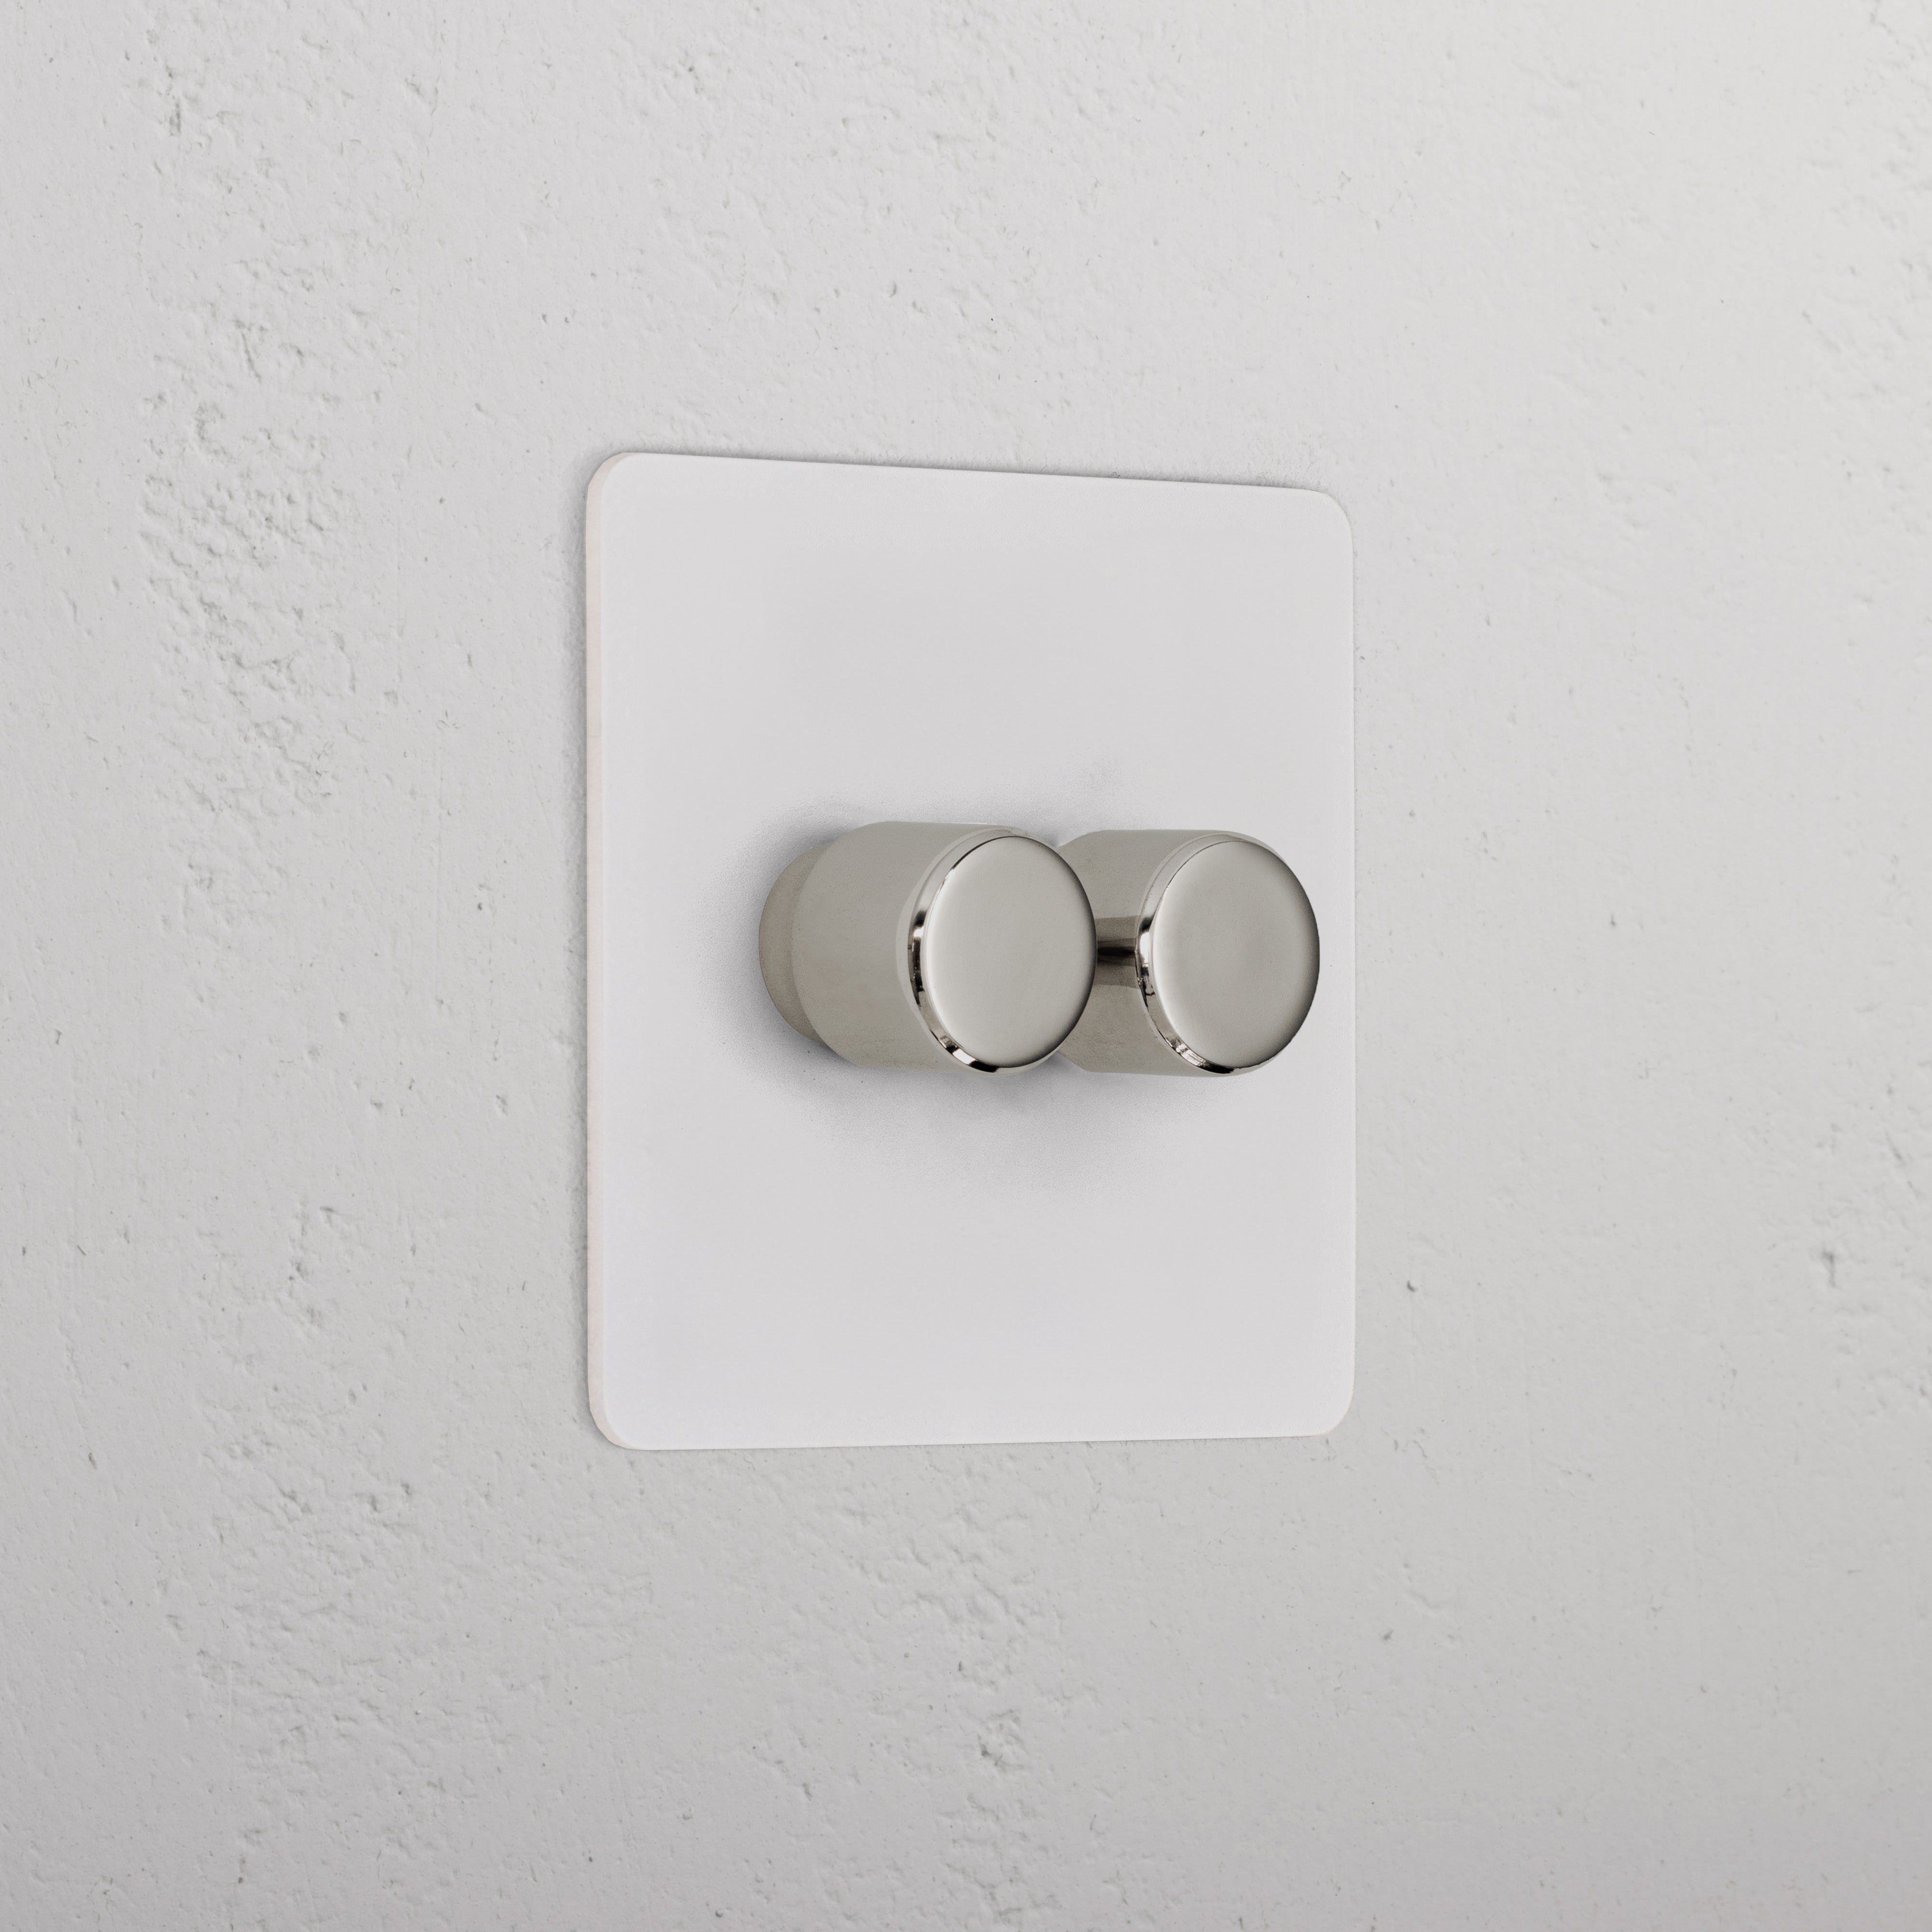 2G Dimmer Switch - Paintable Polished Nickel